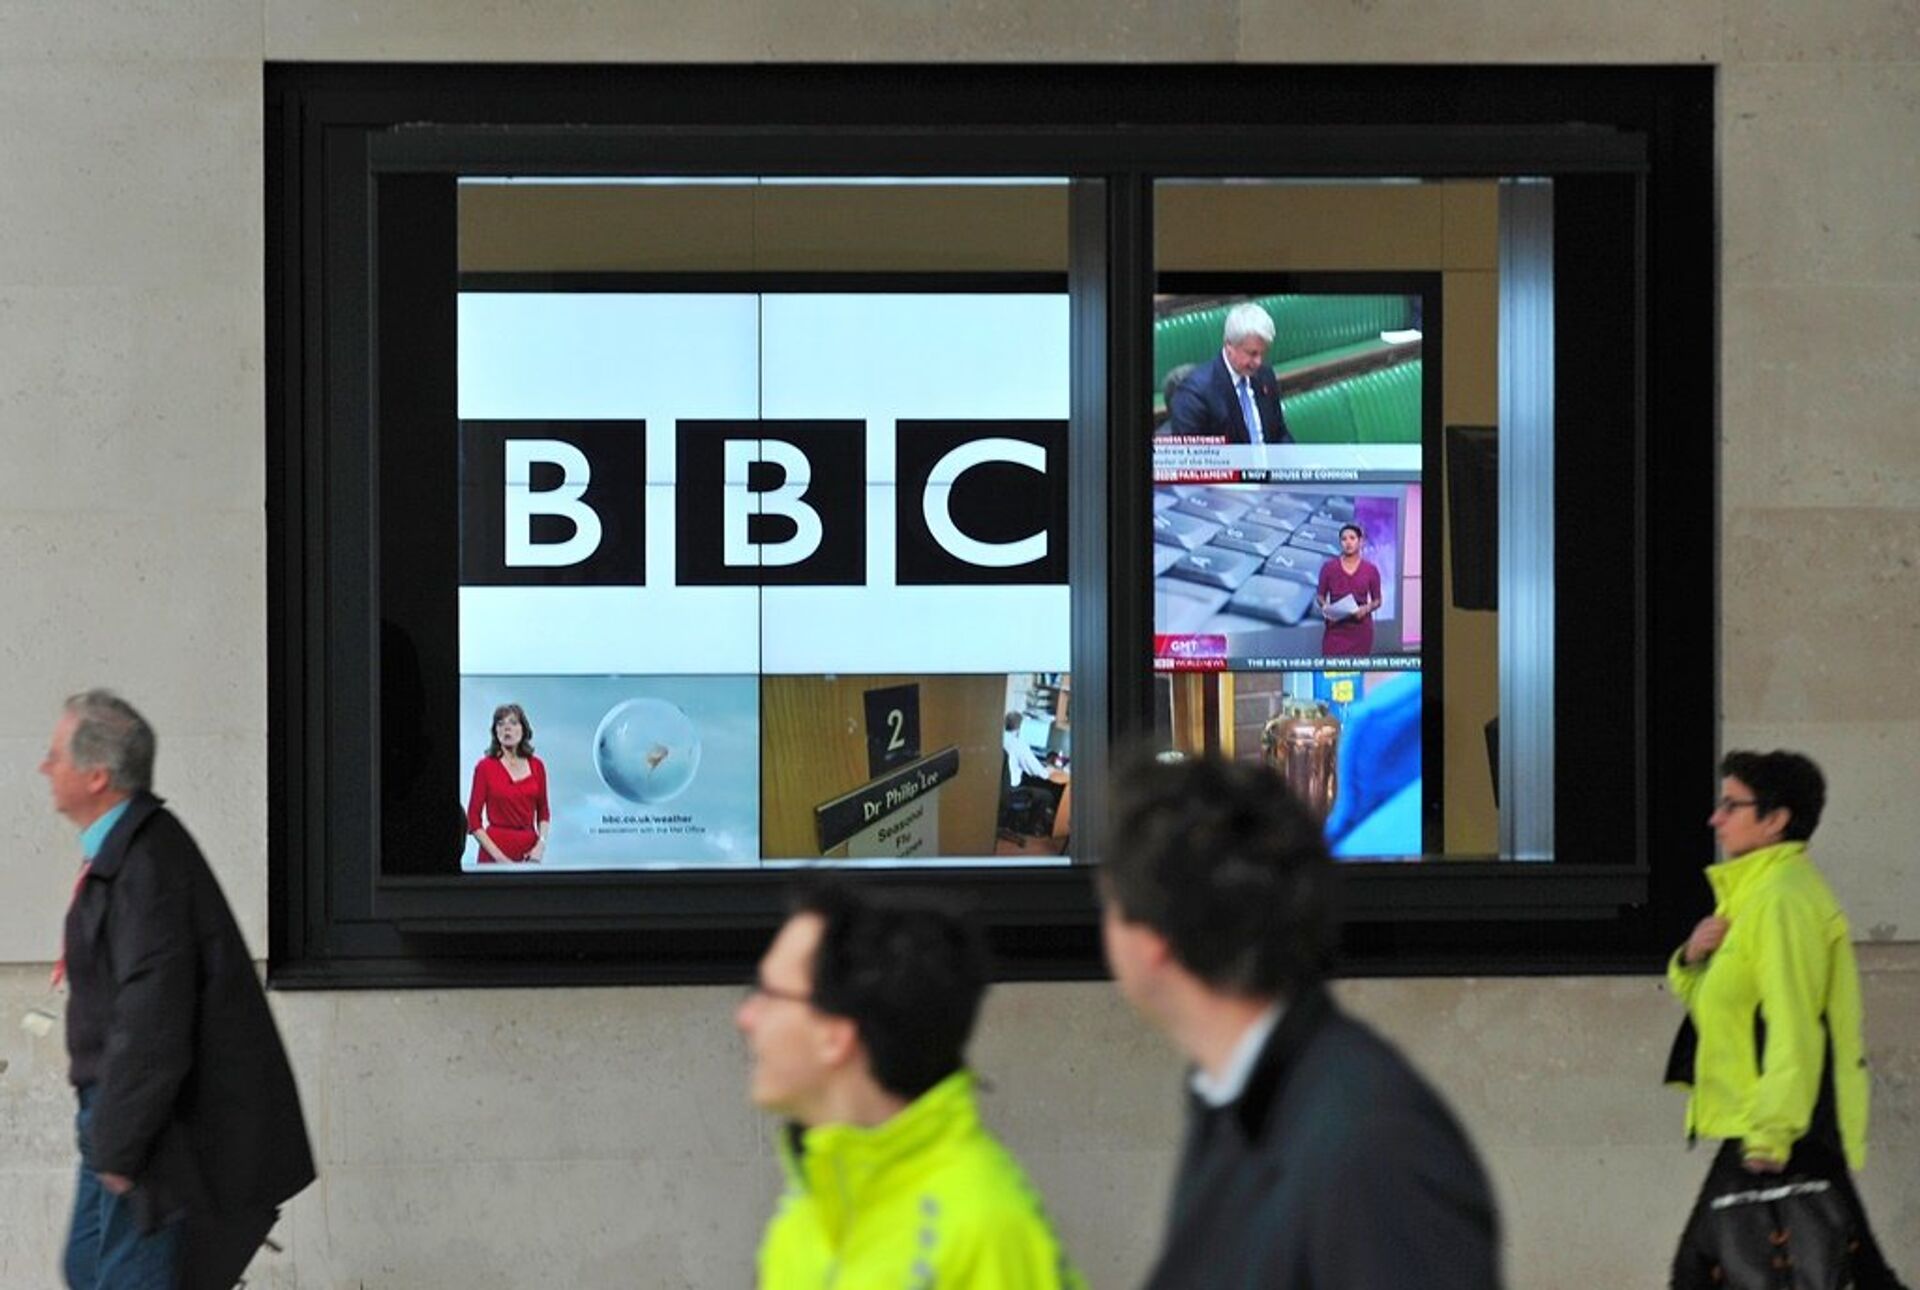 BBC  World News Barred From Airing in China, State Media Claims  - Sputnik International, 1920, 11.02.2021